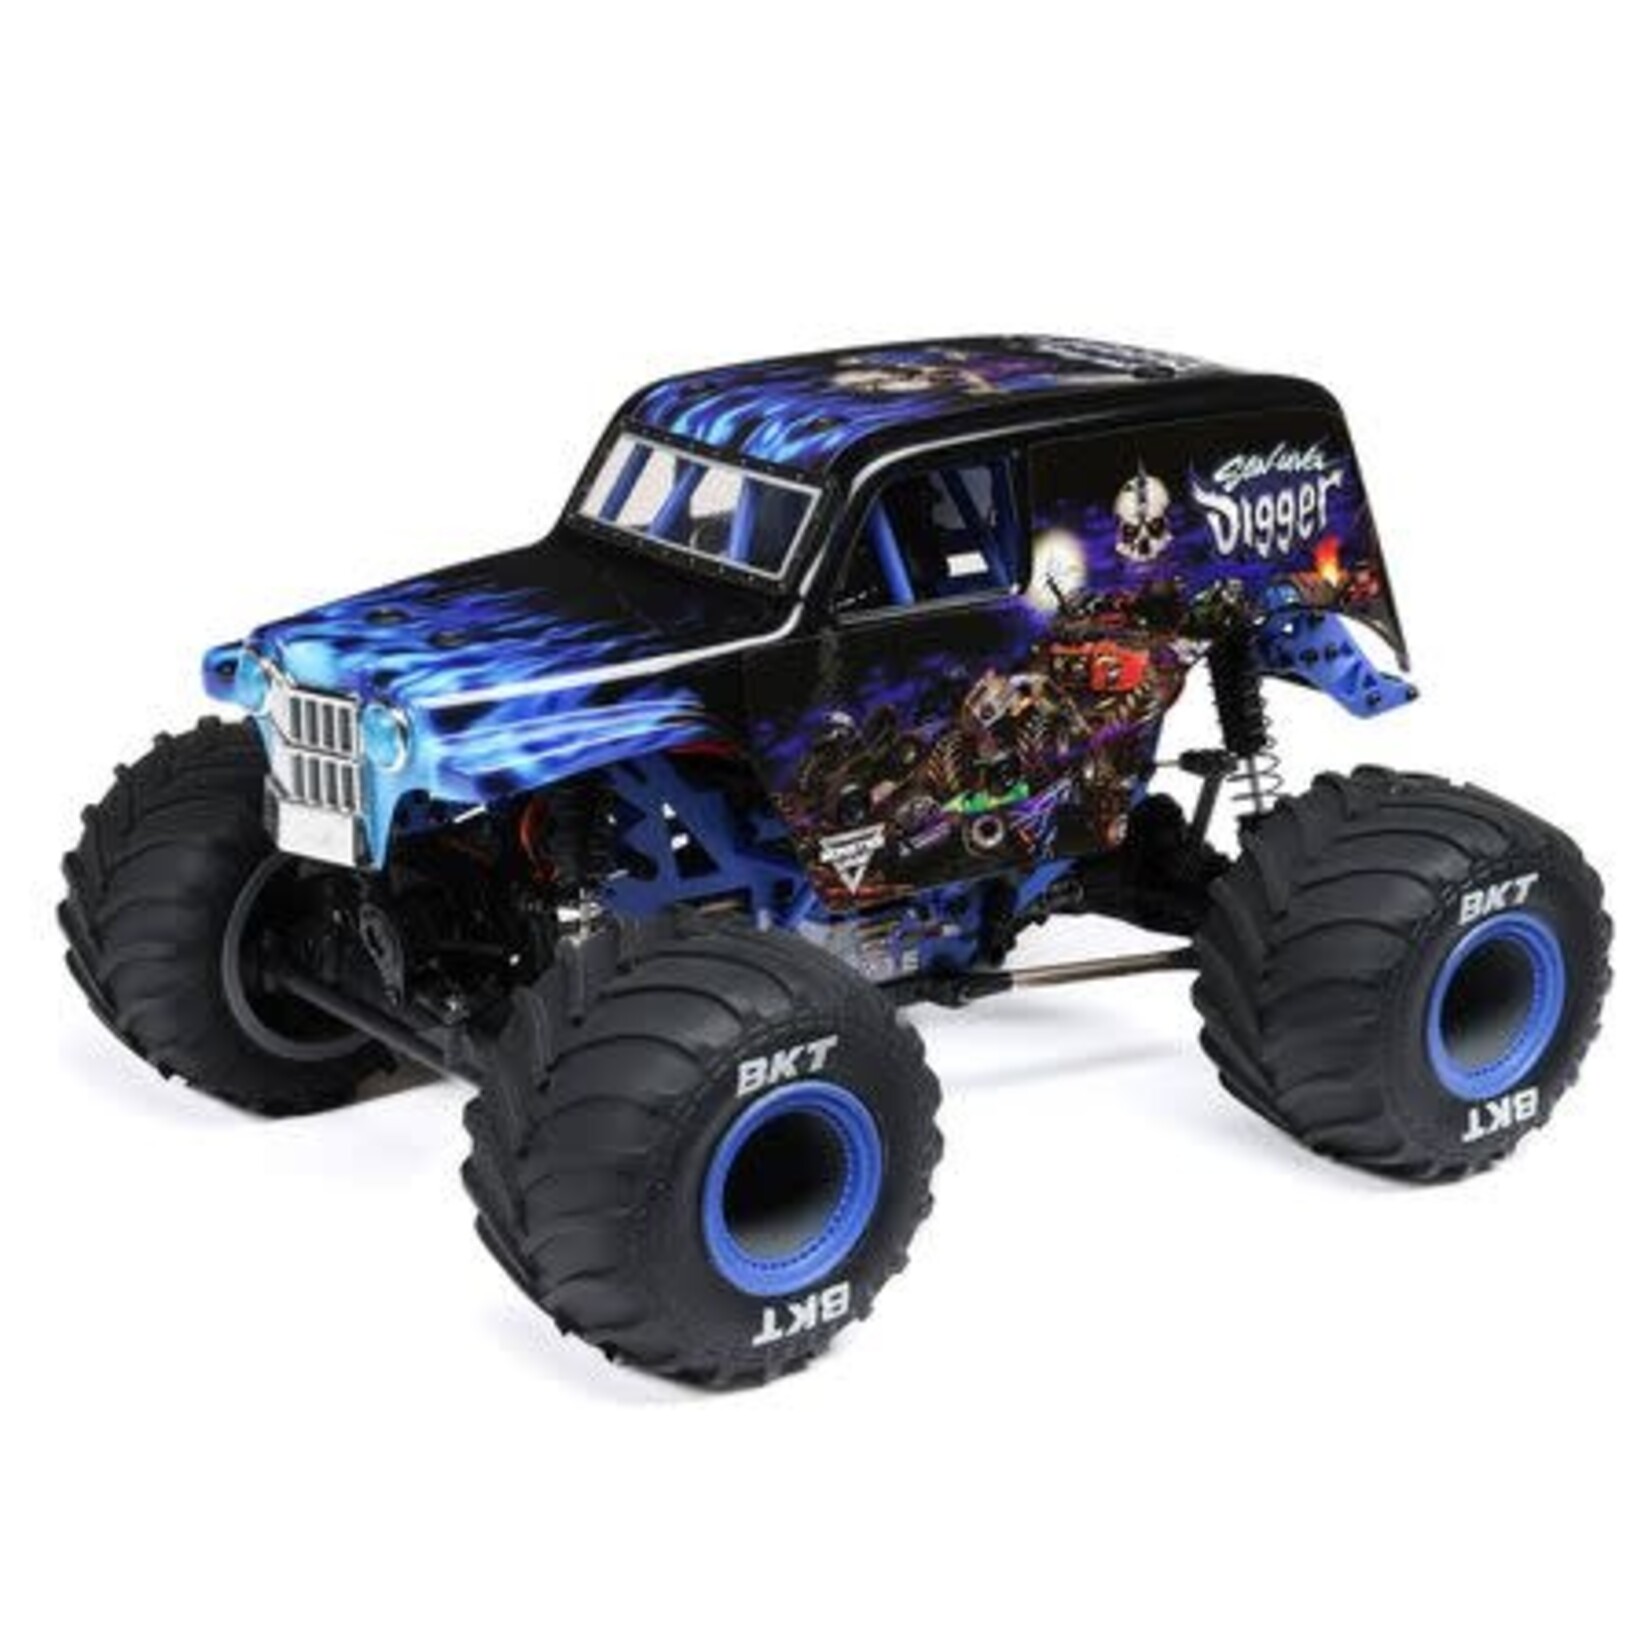 Team Losi 1/18 Mini LMT 4WD Monster Truck Brushed RTR